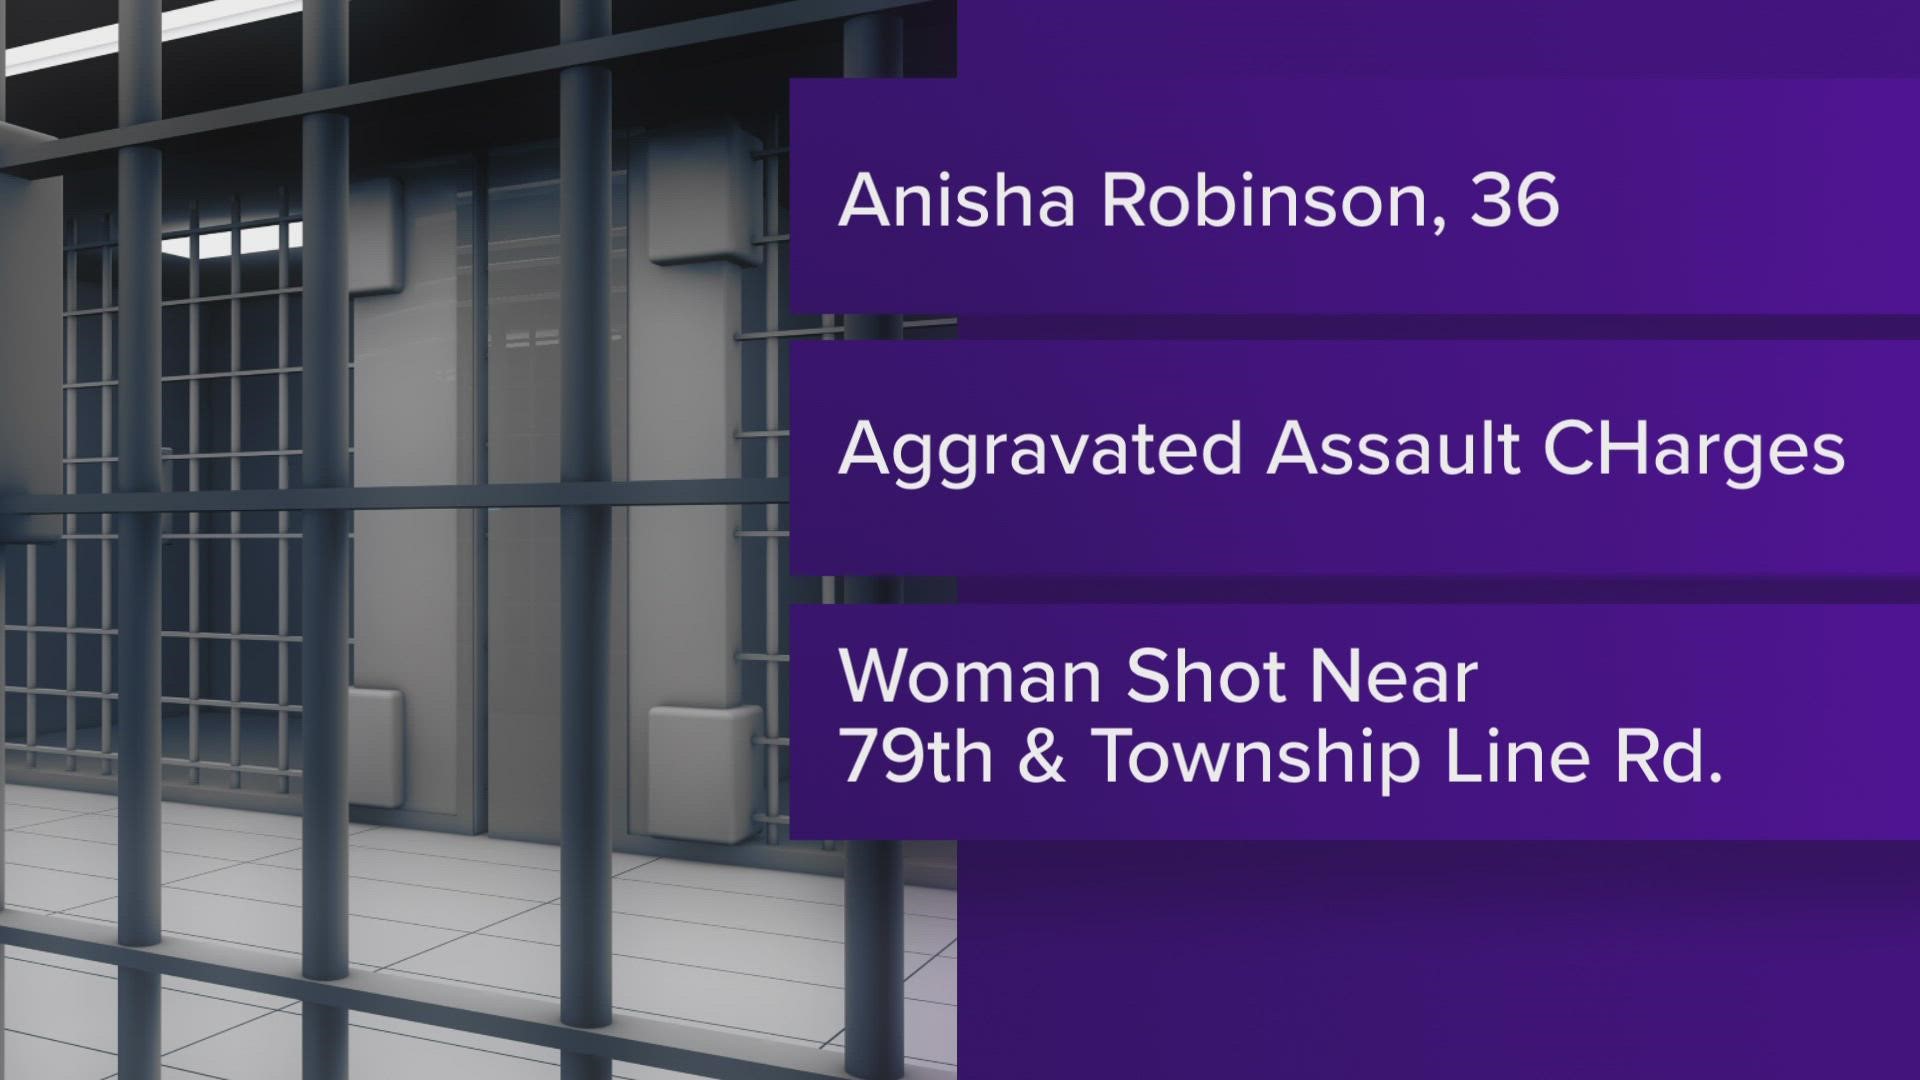 Police say help from the community led them to 36-year-old Anisha Robinson who was arrested for aggravated assault.